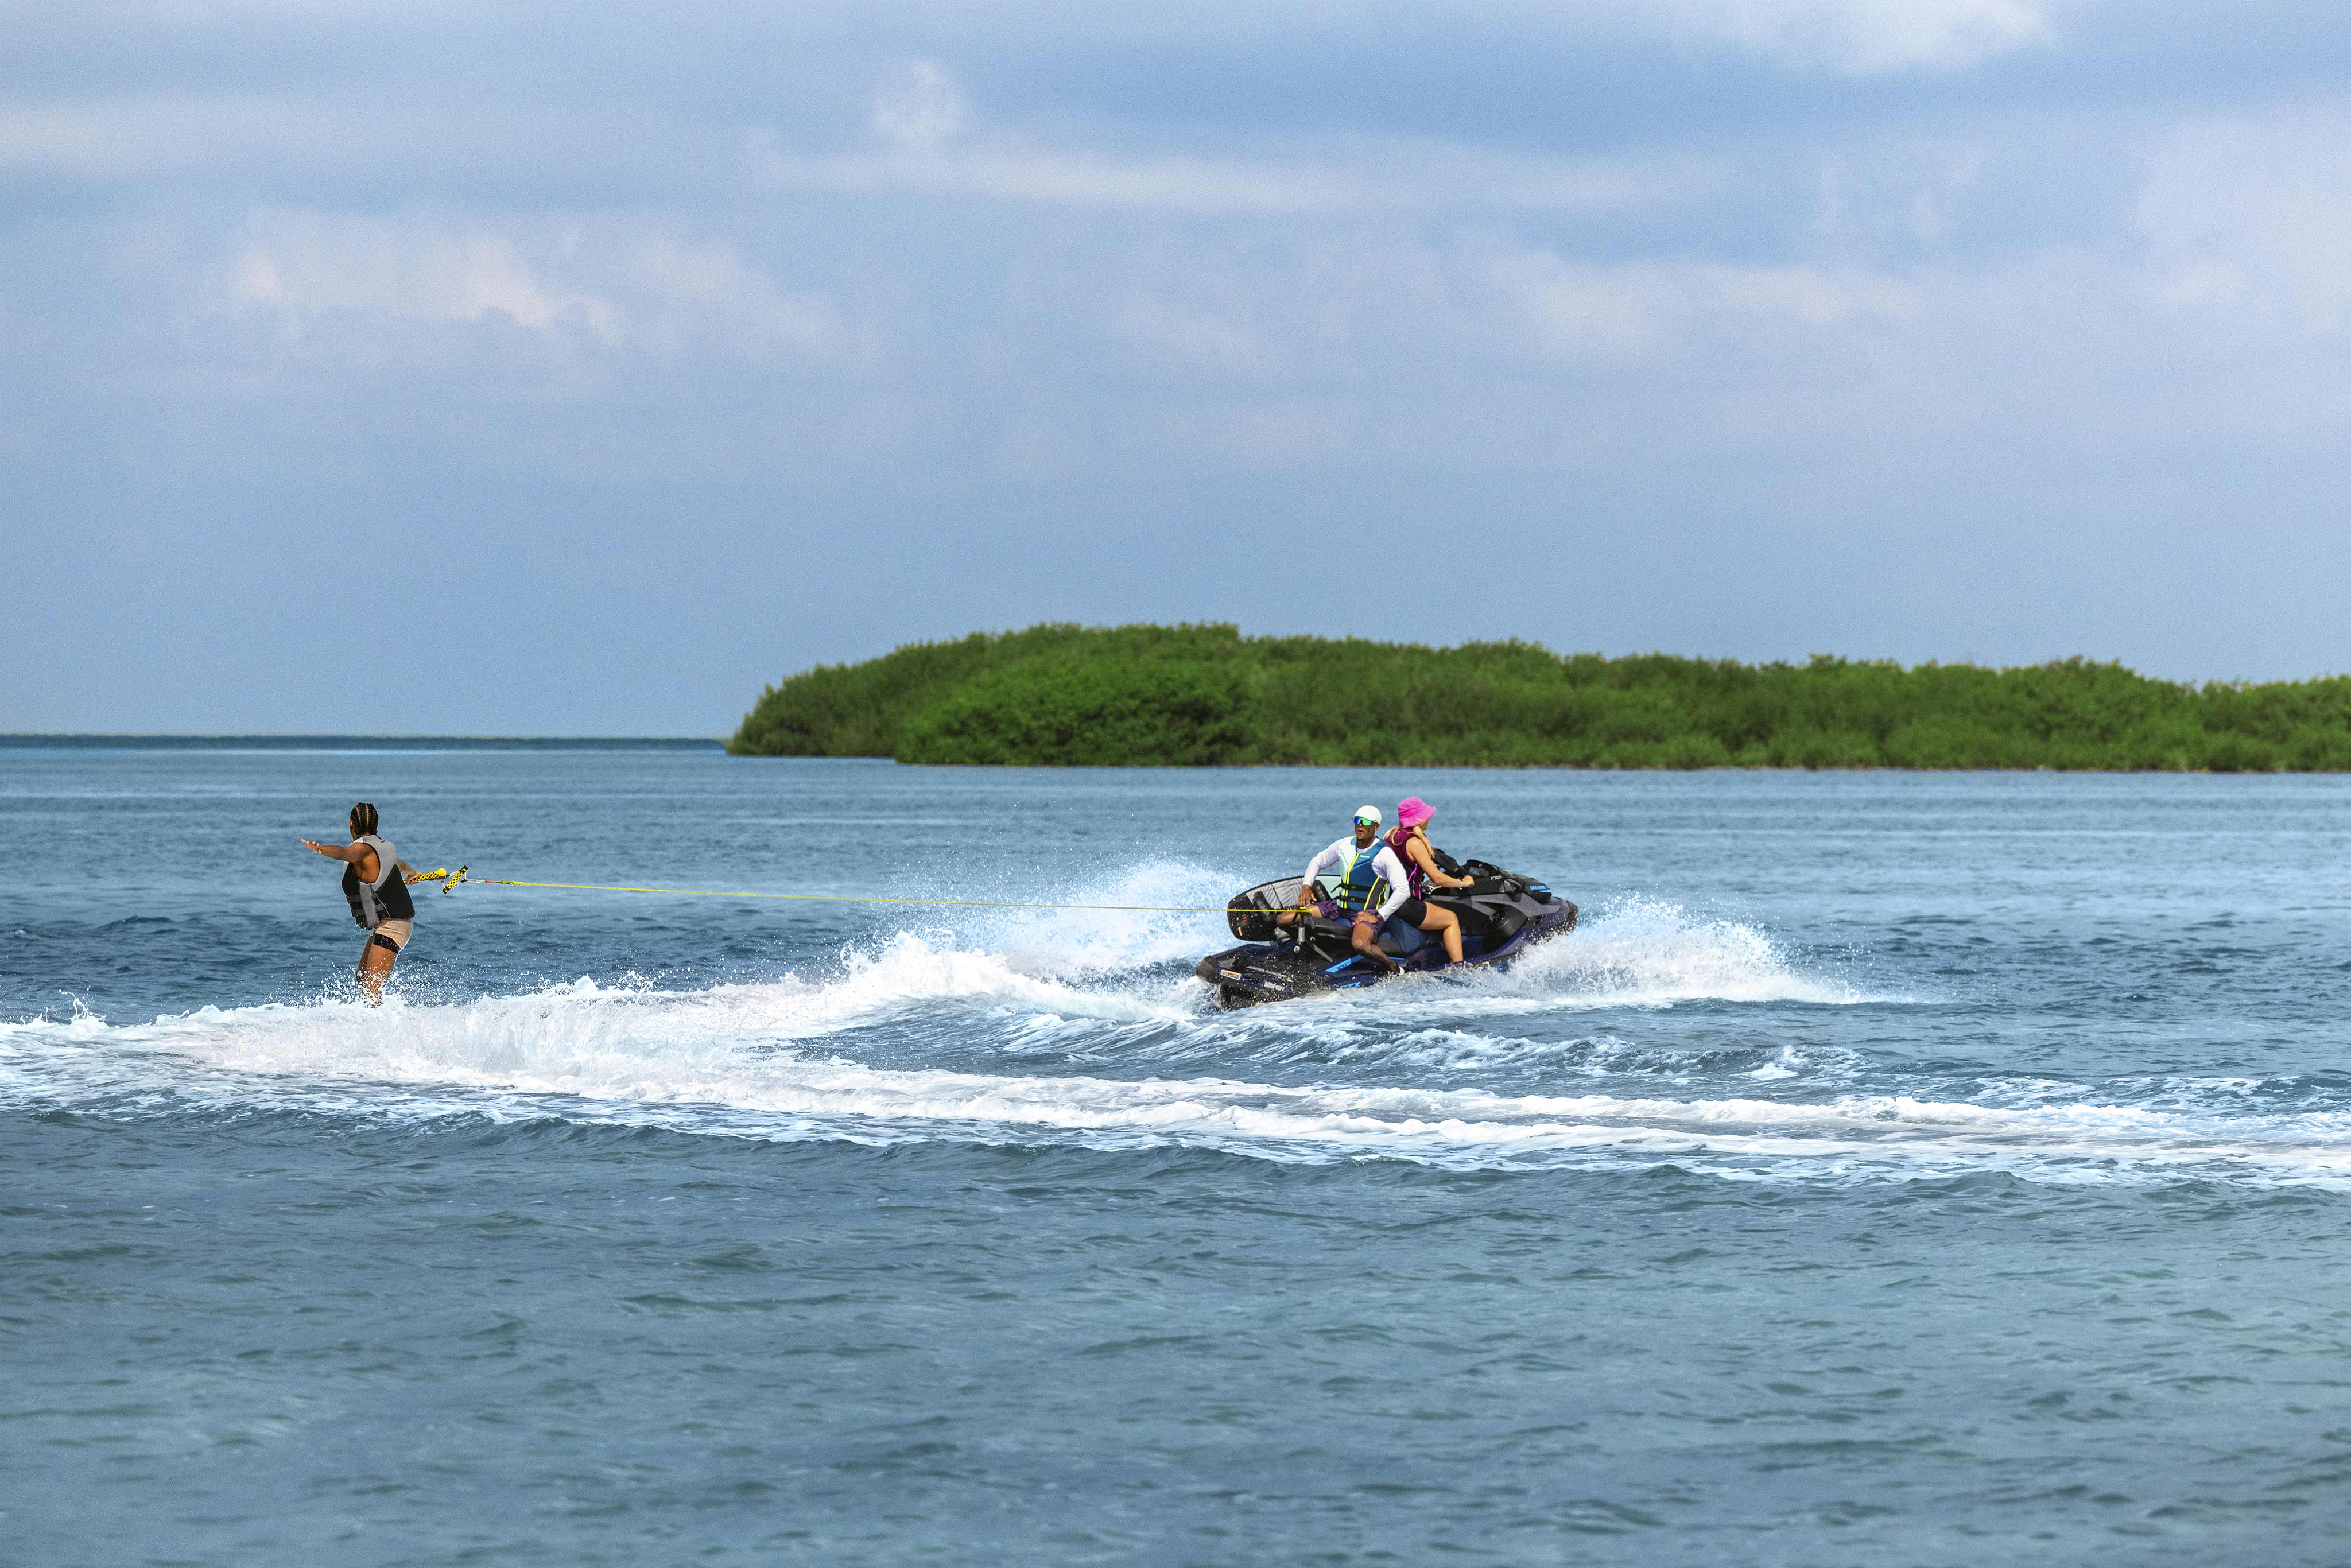 Sea-Doo GTX pulling a wakeboarder